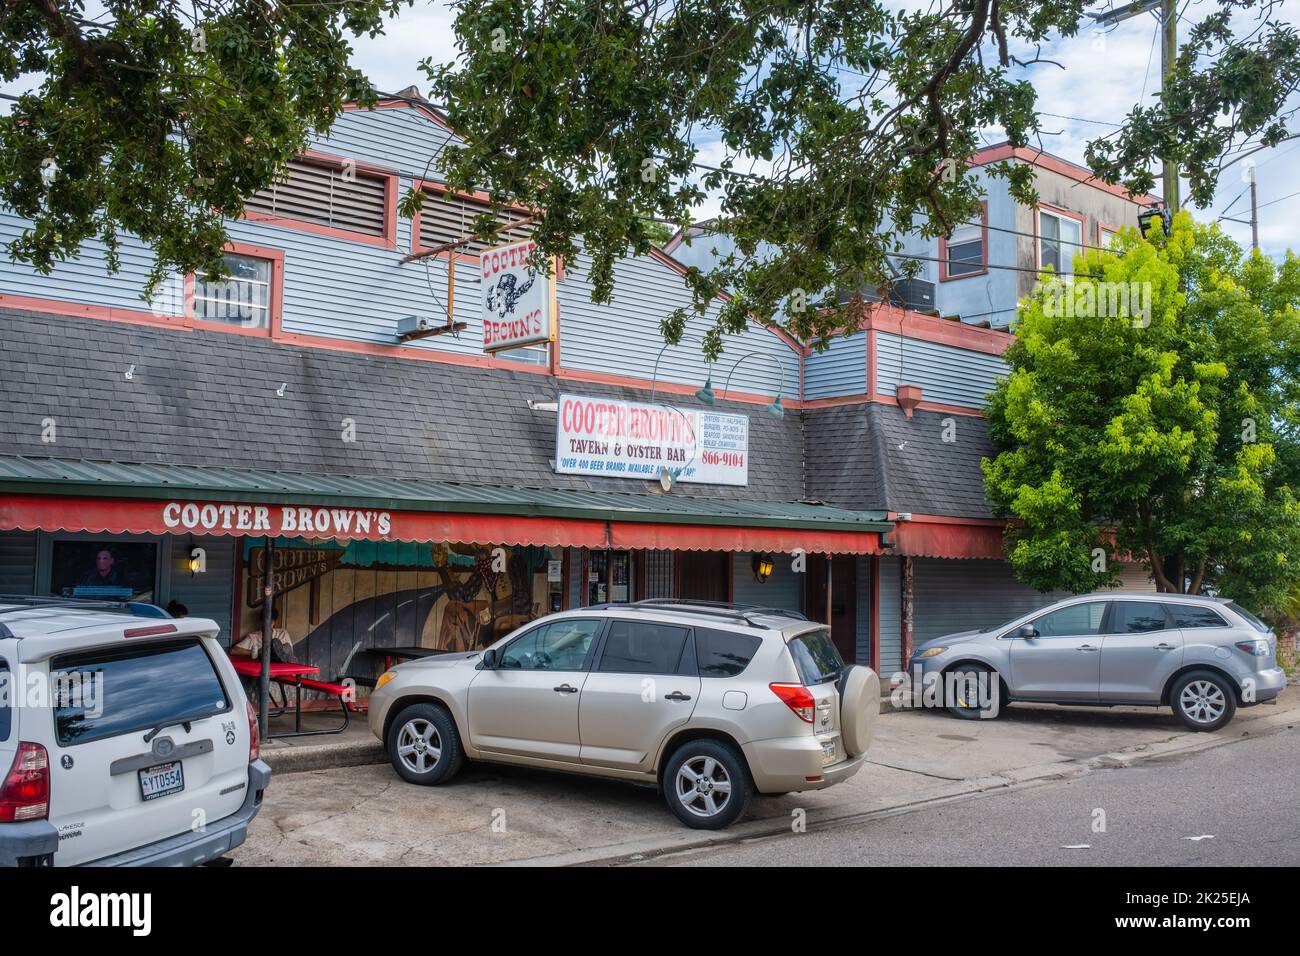 NEW ORLEANS, LA, USA - JUNE 30, 2022: Front of popular Cooter Brown's Tavern and Oyster Bar on S. Carrollton Avenue Stock Photo